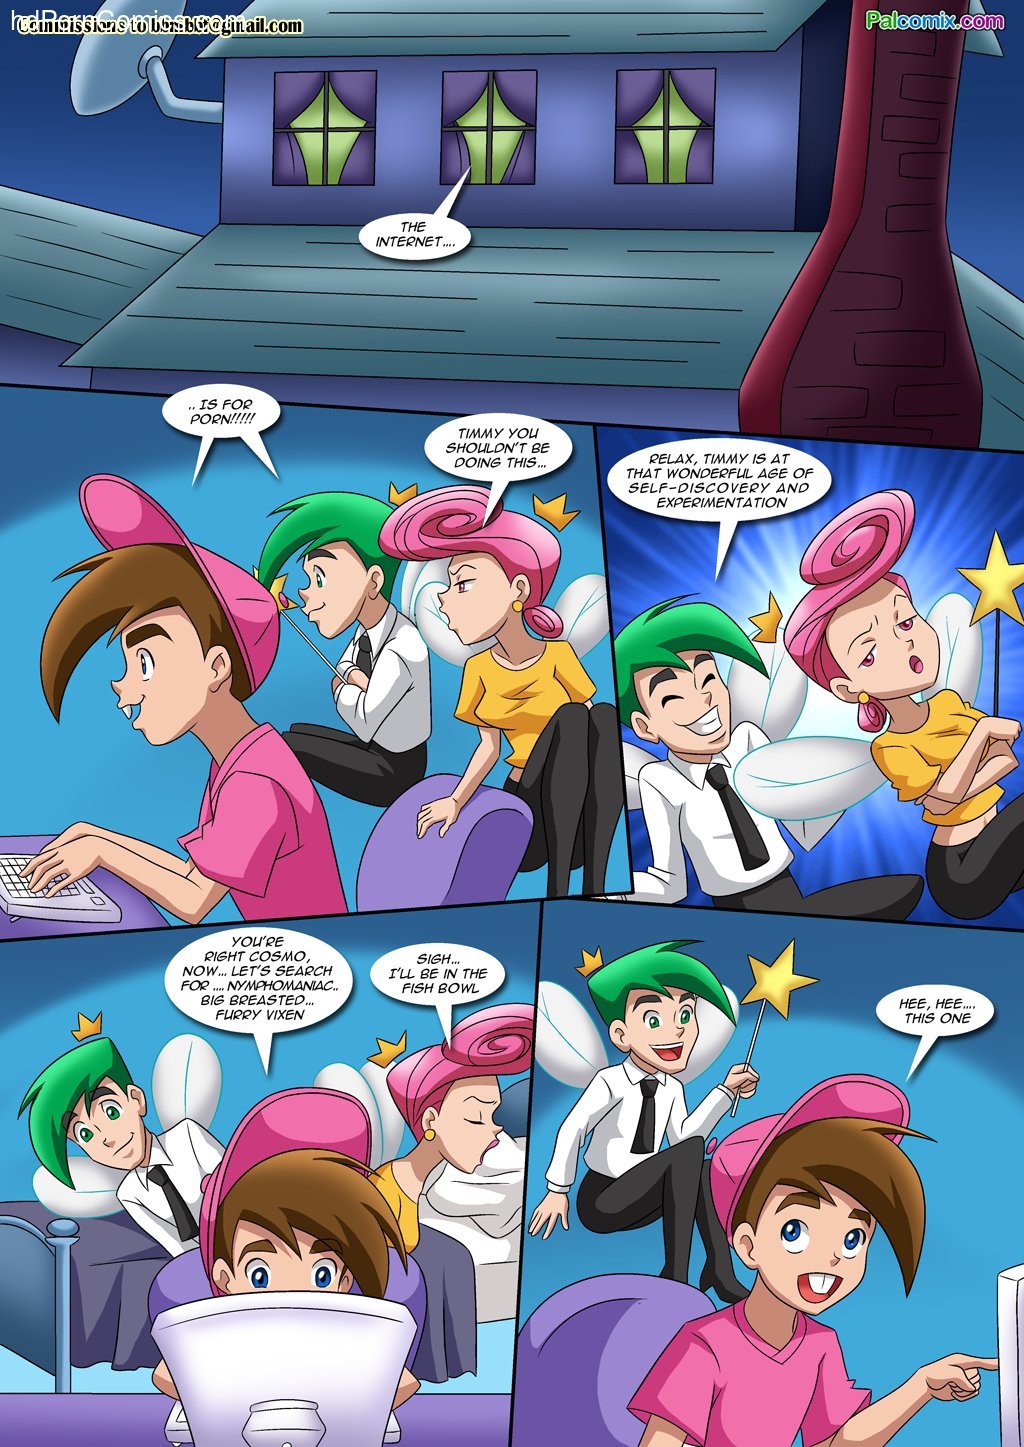 Enormous Cock Cartoon Porn Fairly Oddparents - ... The fairly Odd Parents2 free sex comic